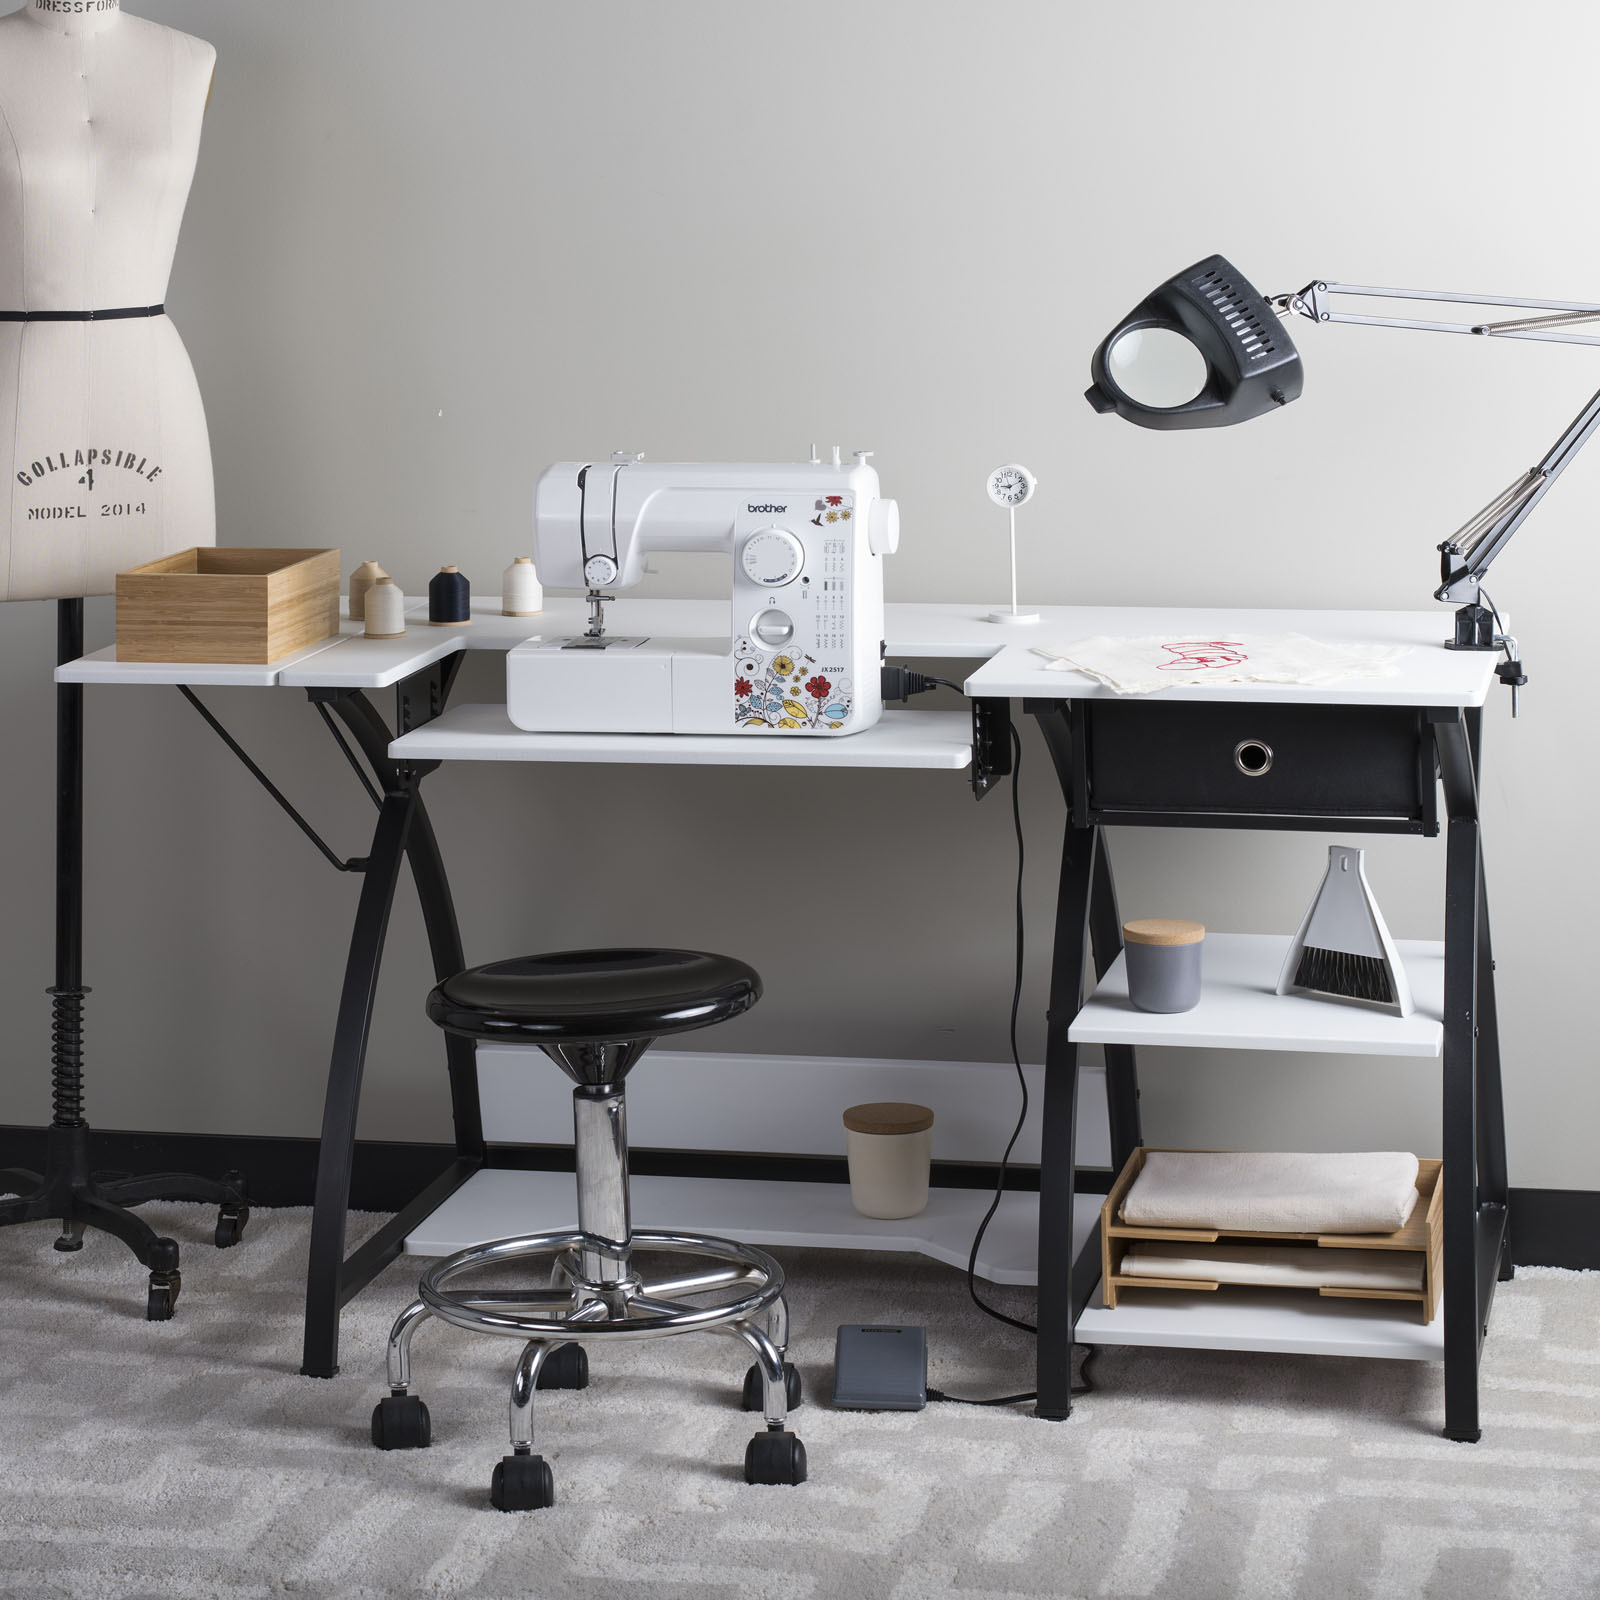 18+ Sewing Room Desk - RaygenDexter